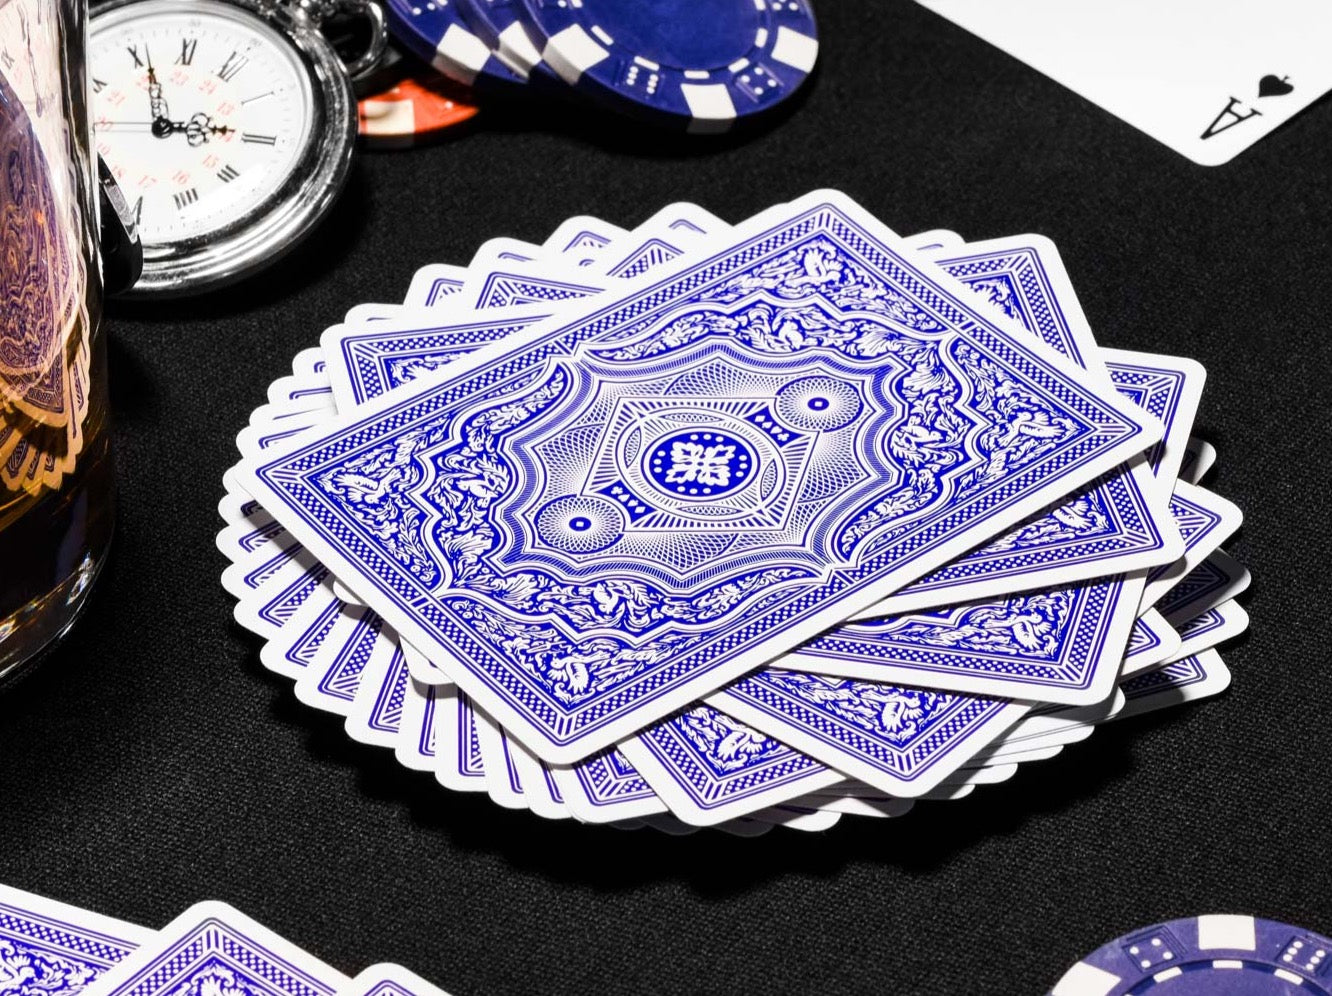 Blue Cohorts by Luxury-pressed E7 | Ellusionist